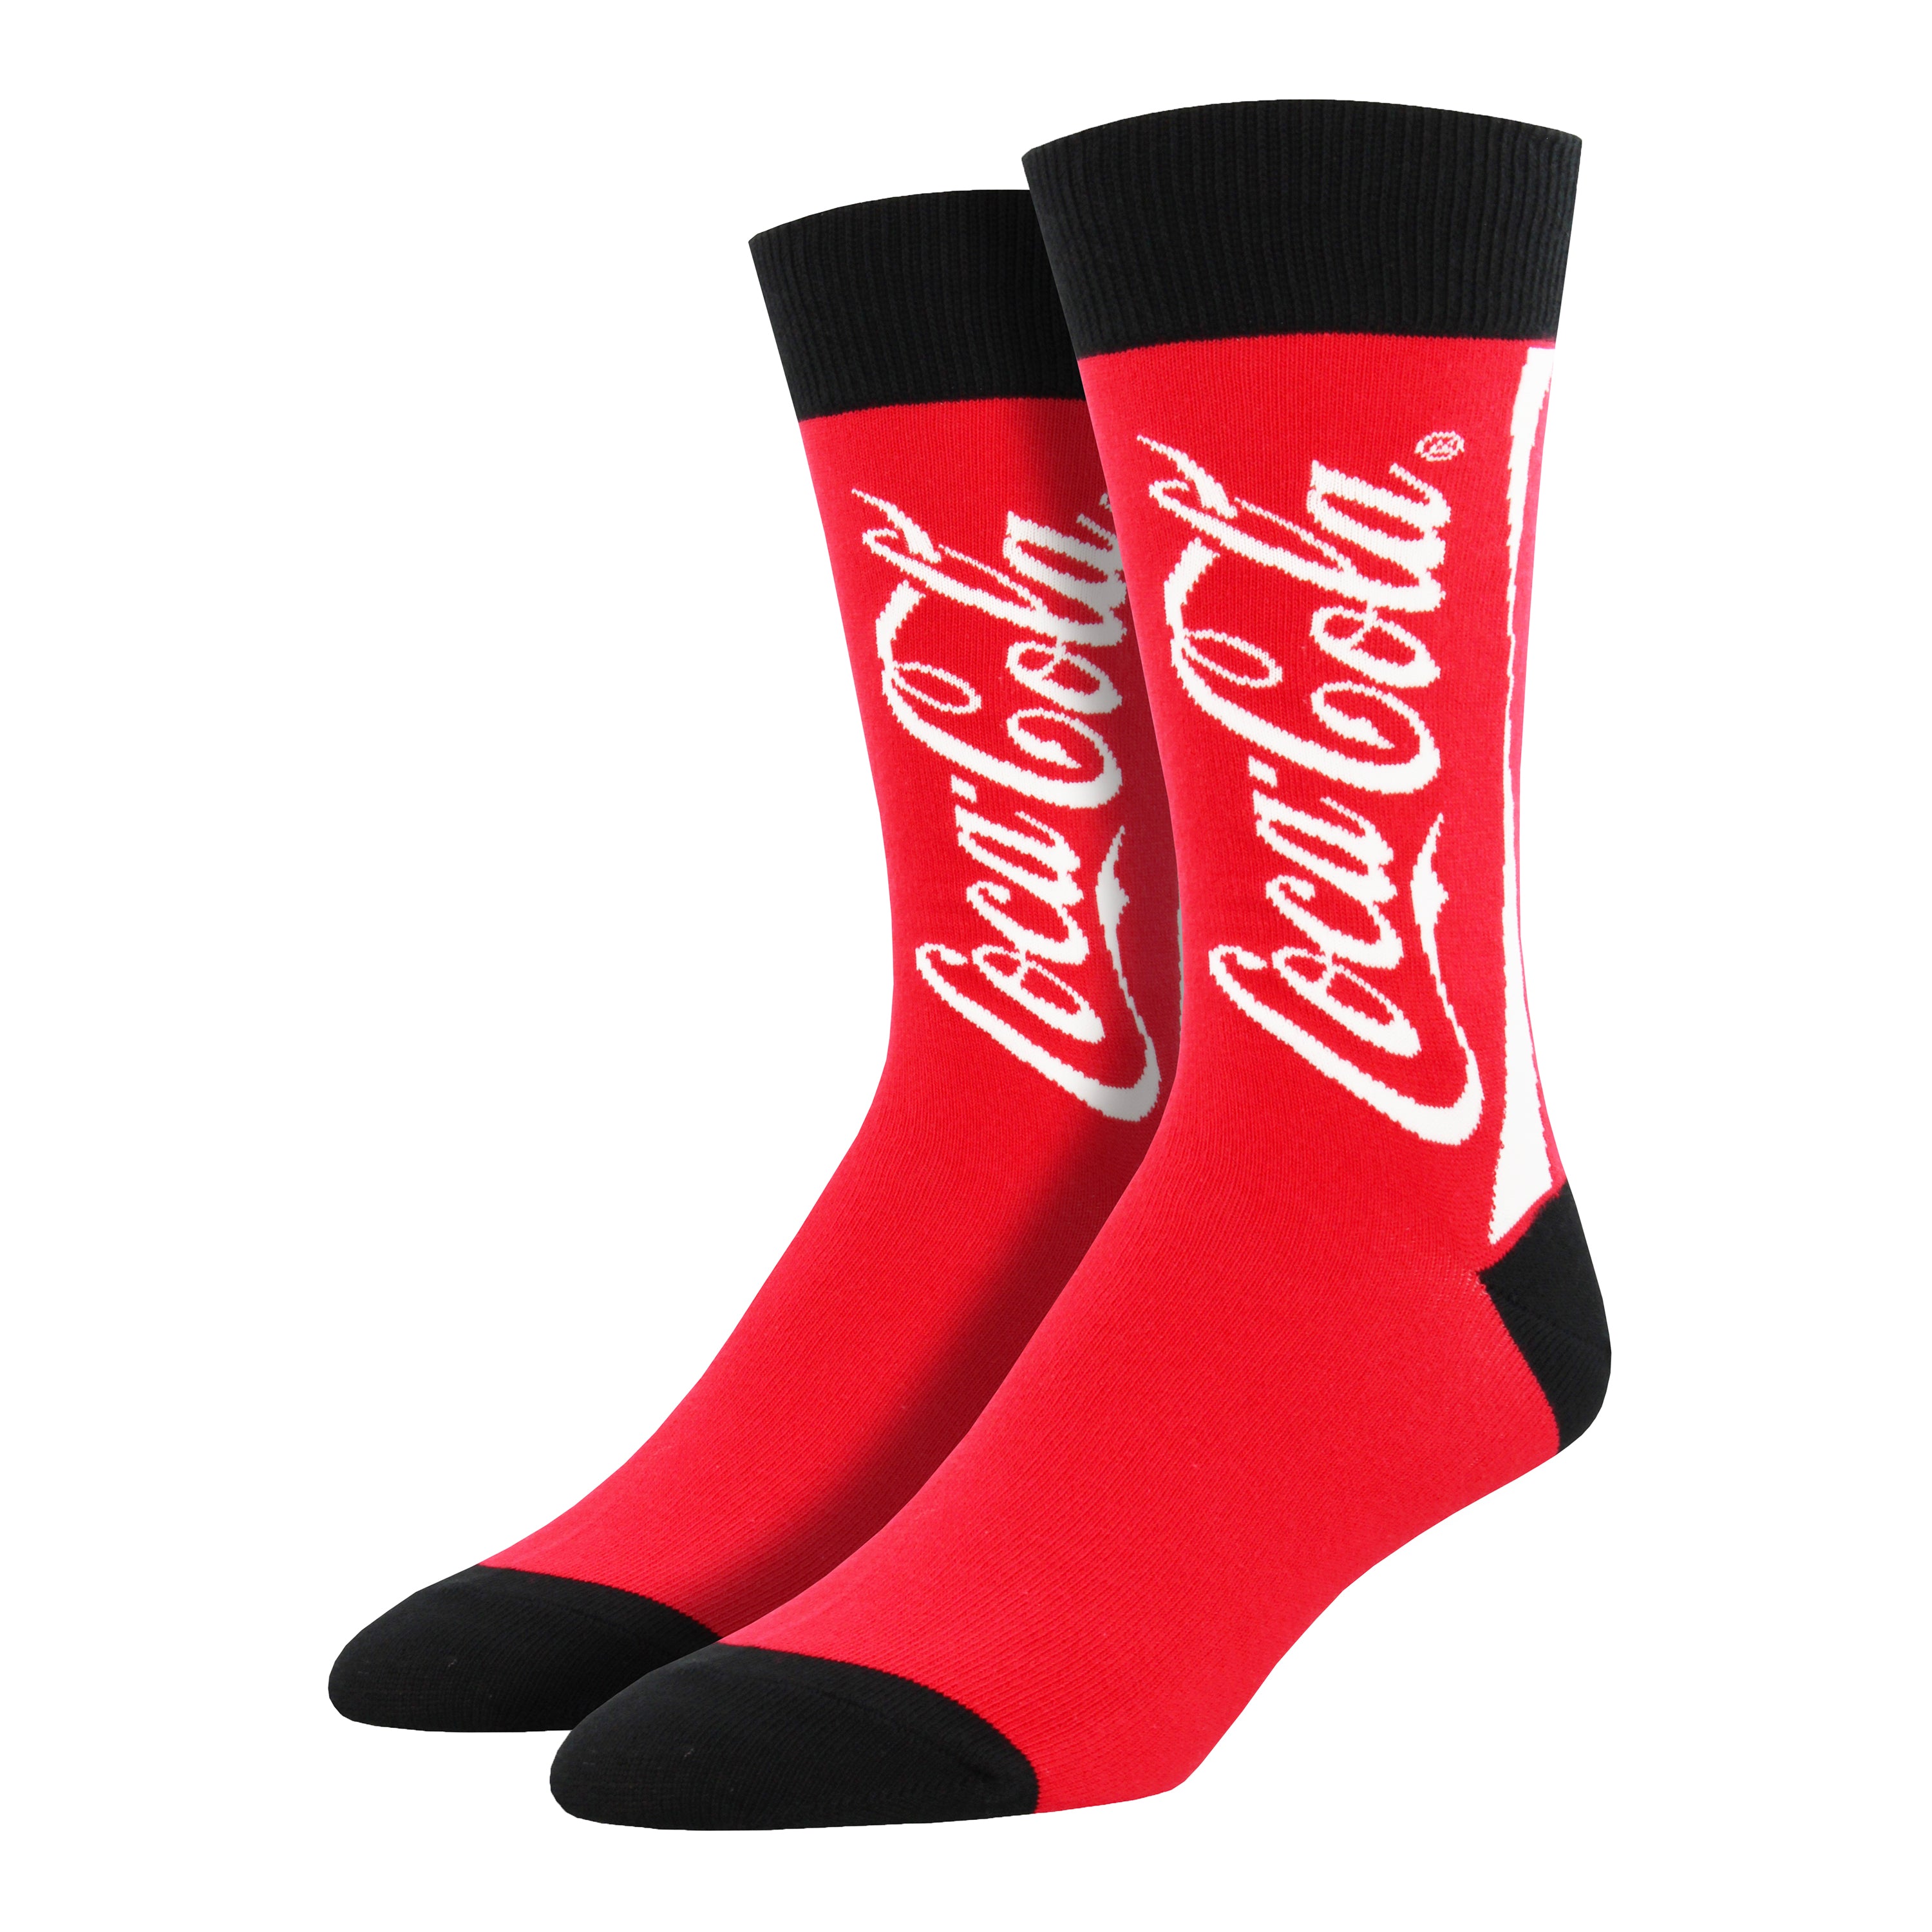 Shown on a foot form, a pair of Socksmith's red cotton men's crew socks with Coca-Cola logo text and black cuff/heel/toe